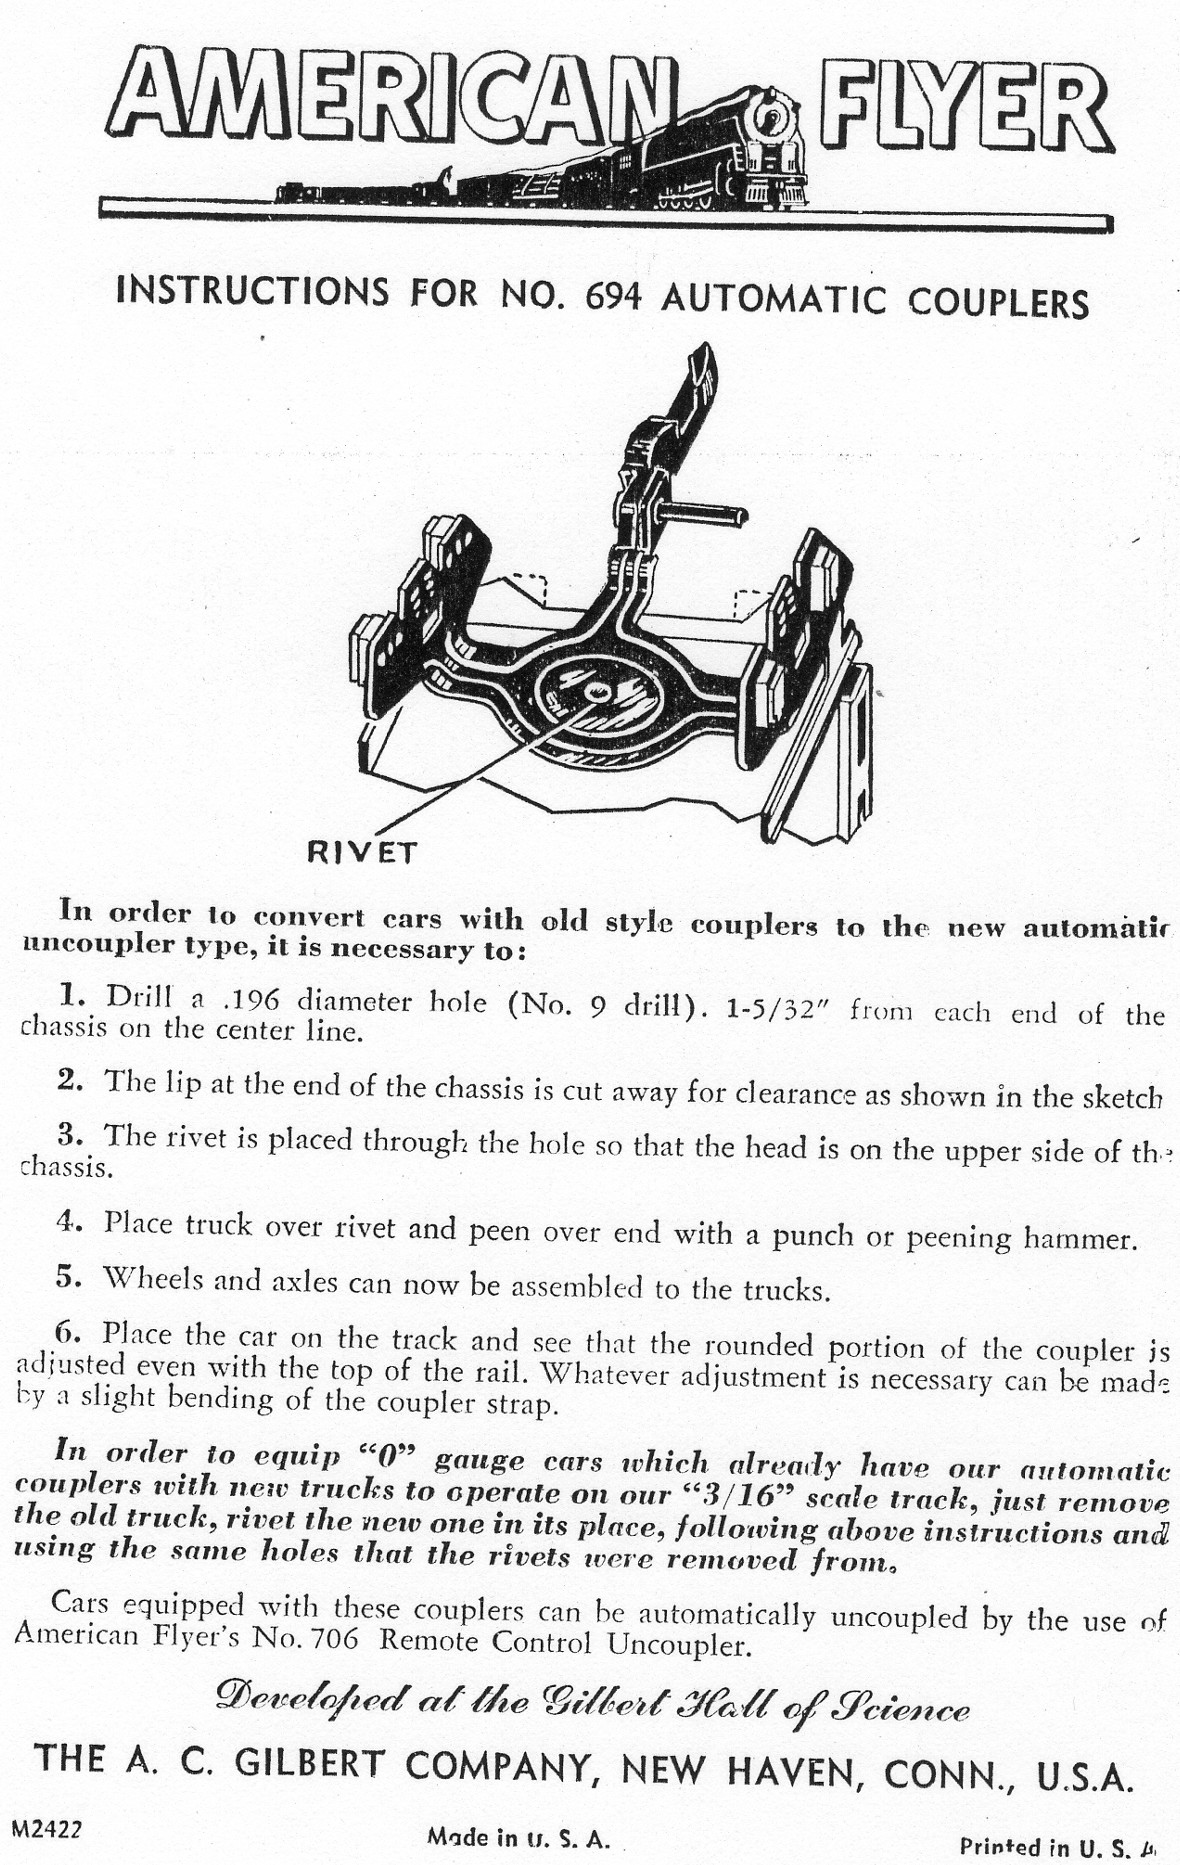 Instructions for No. 694 Automatic Couplers